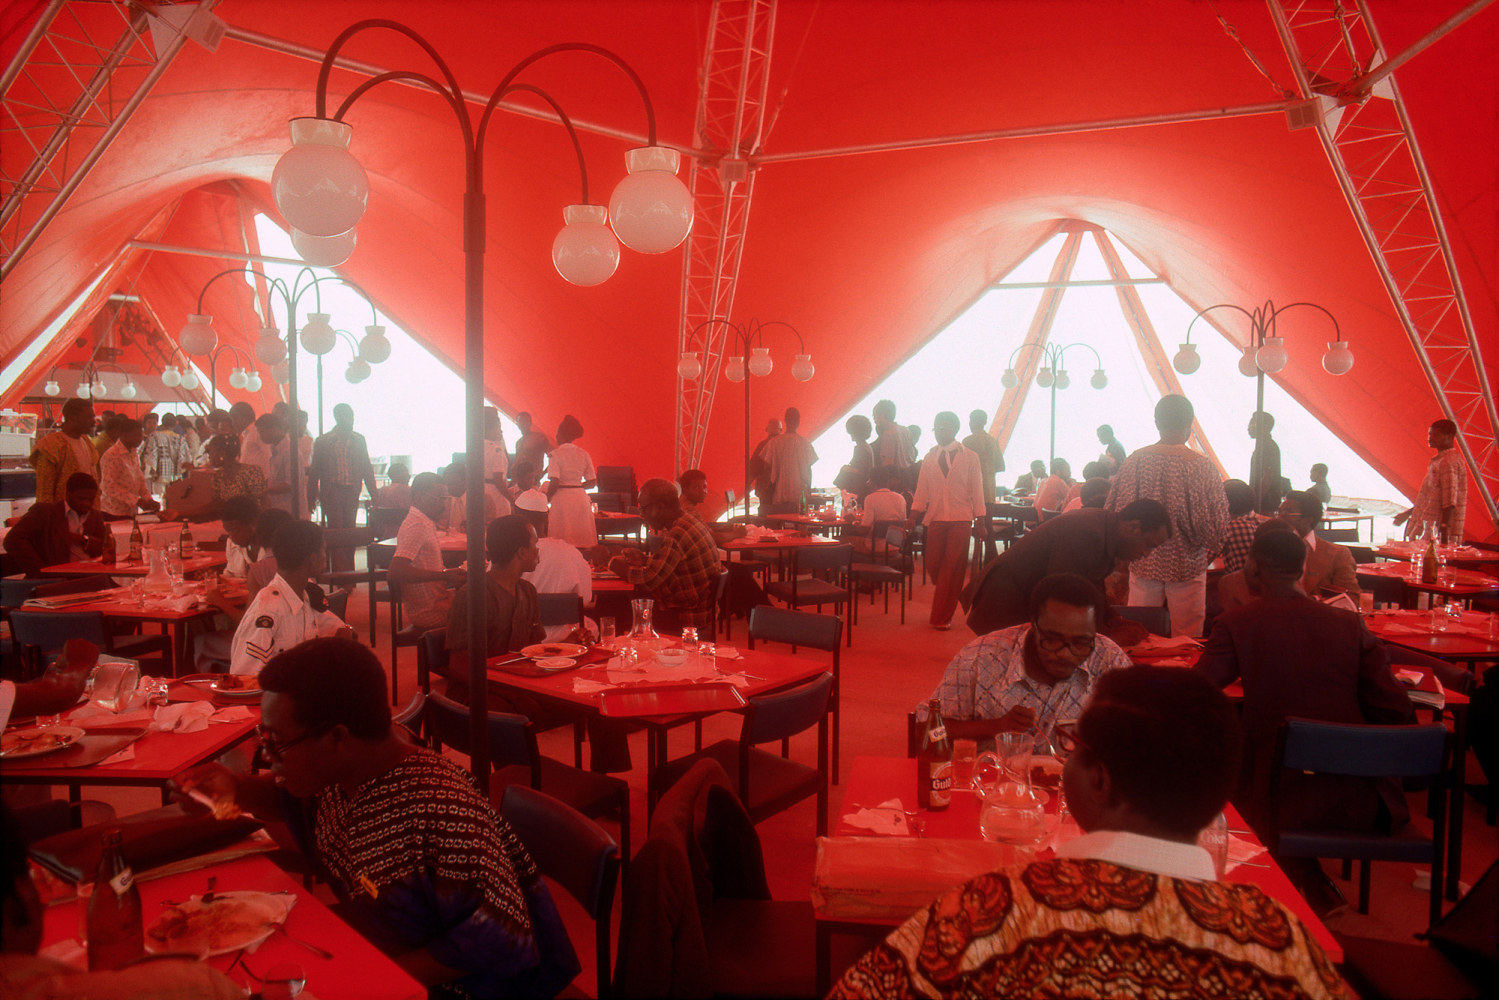 Roy Lewis (b. 1937)
National Theater Meal Tents in Lagos, 1977
Archival inkjet print on Simply Elegant Gold Fibre paper
Image: 13 3/4 x 20 inches (34.9 x 50.8 cm) Sheet: 17 x 22 inches (43.2 x 55.9 cm)
Framed: 18 5/8 &amp;times; 25 3/8 &amp;times; 1 1/2 inches (47.3 &amp;times; 64.5 &amp;times; 3.8 cm)
Edition of 5, printed 2023